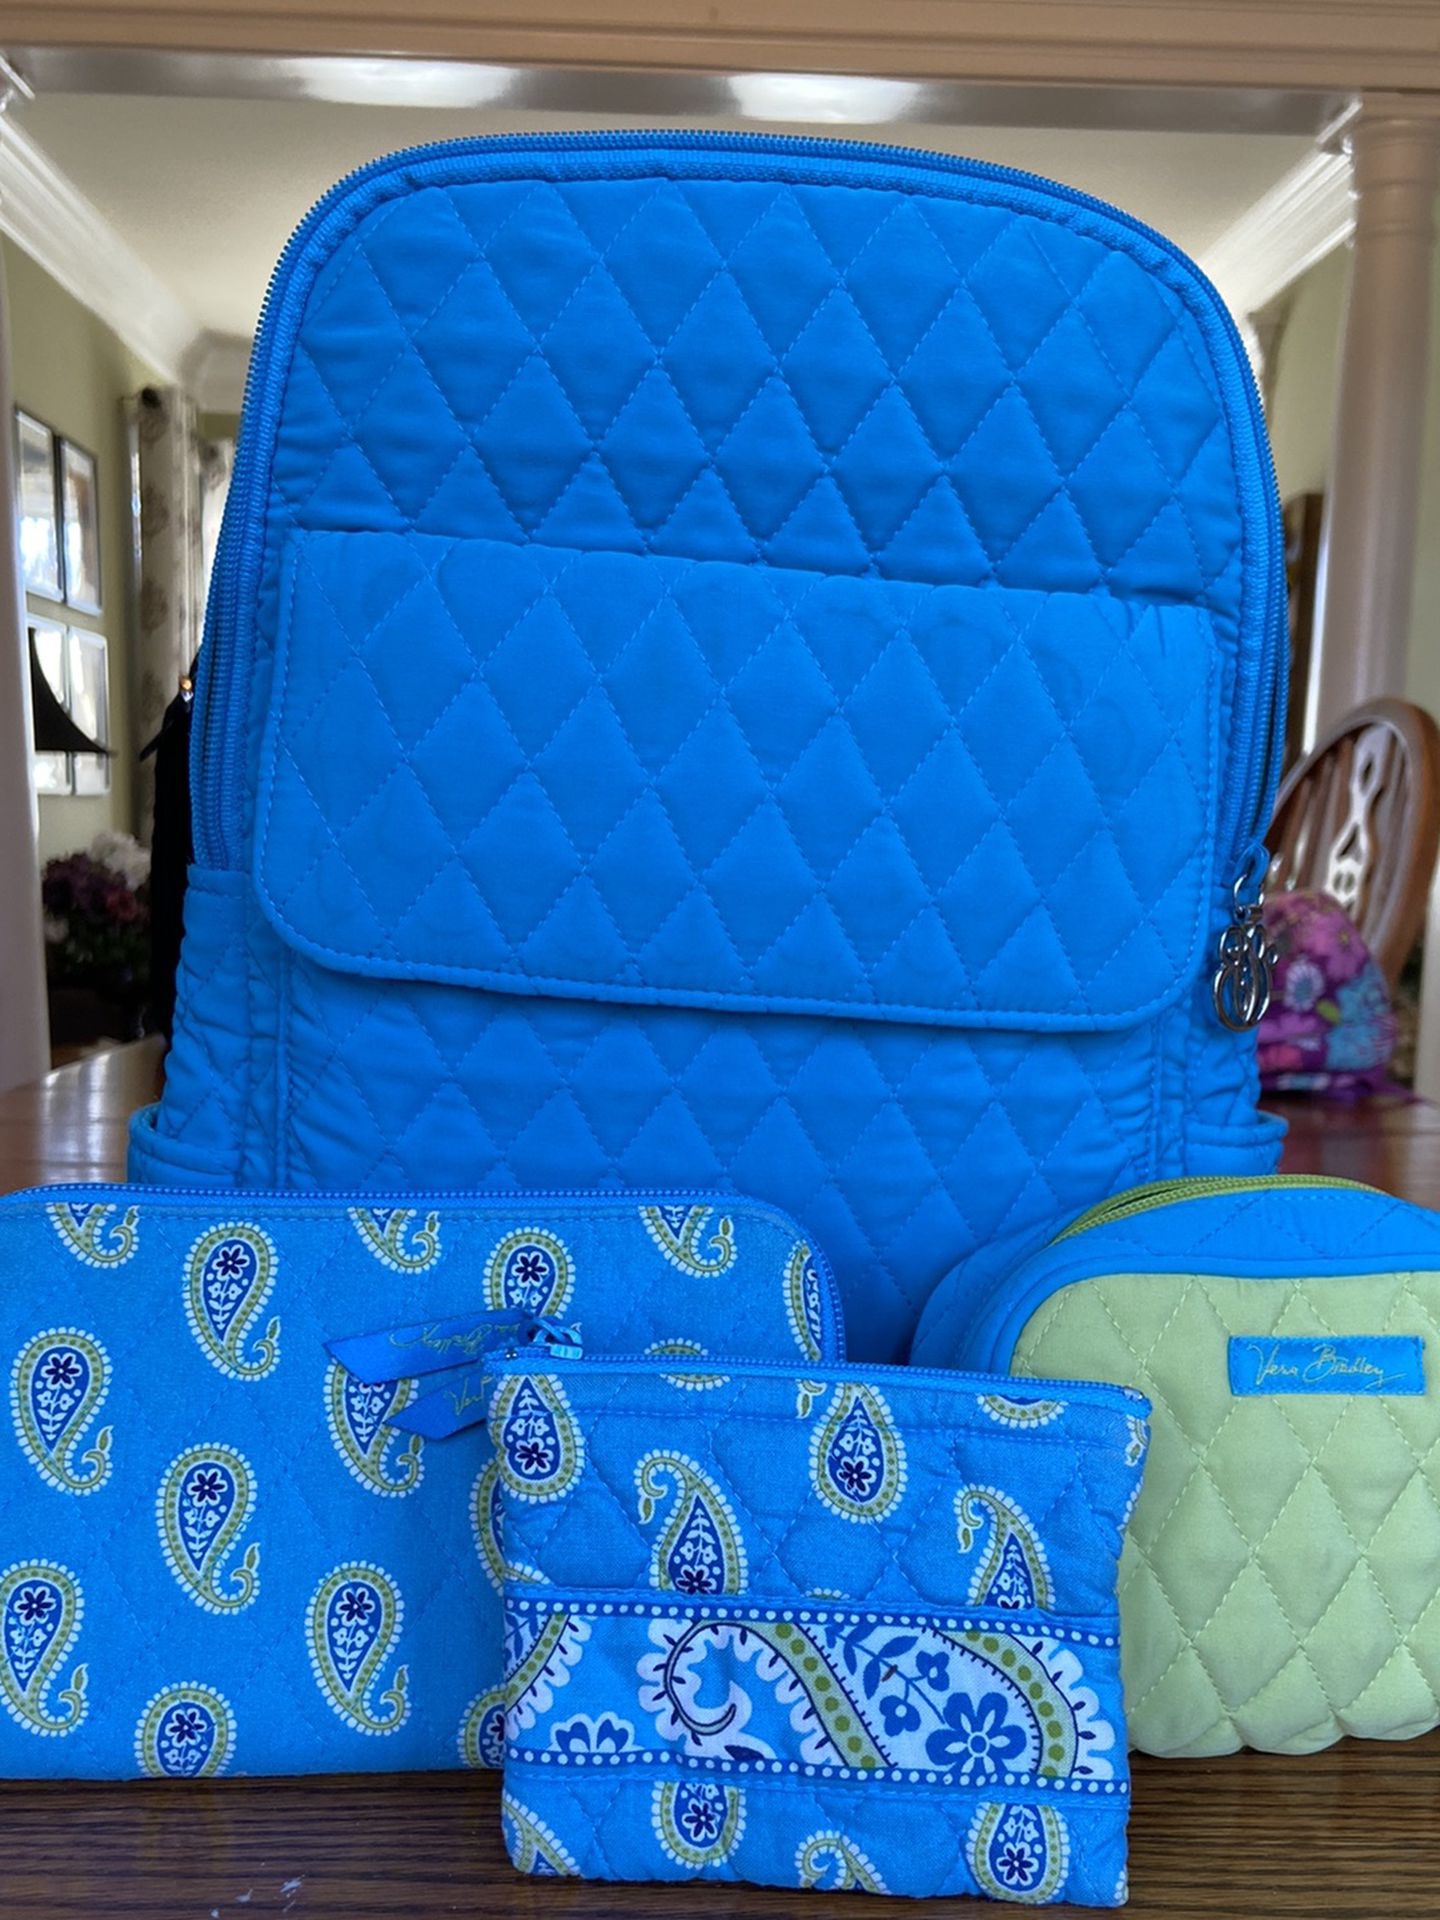 Vera Bradley Backpack and Accessories